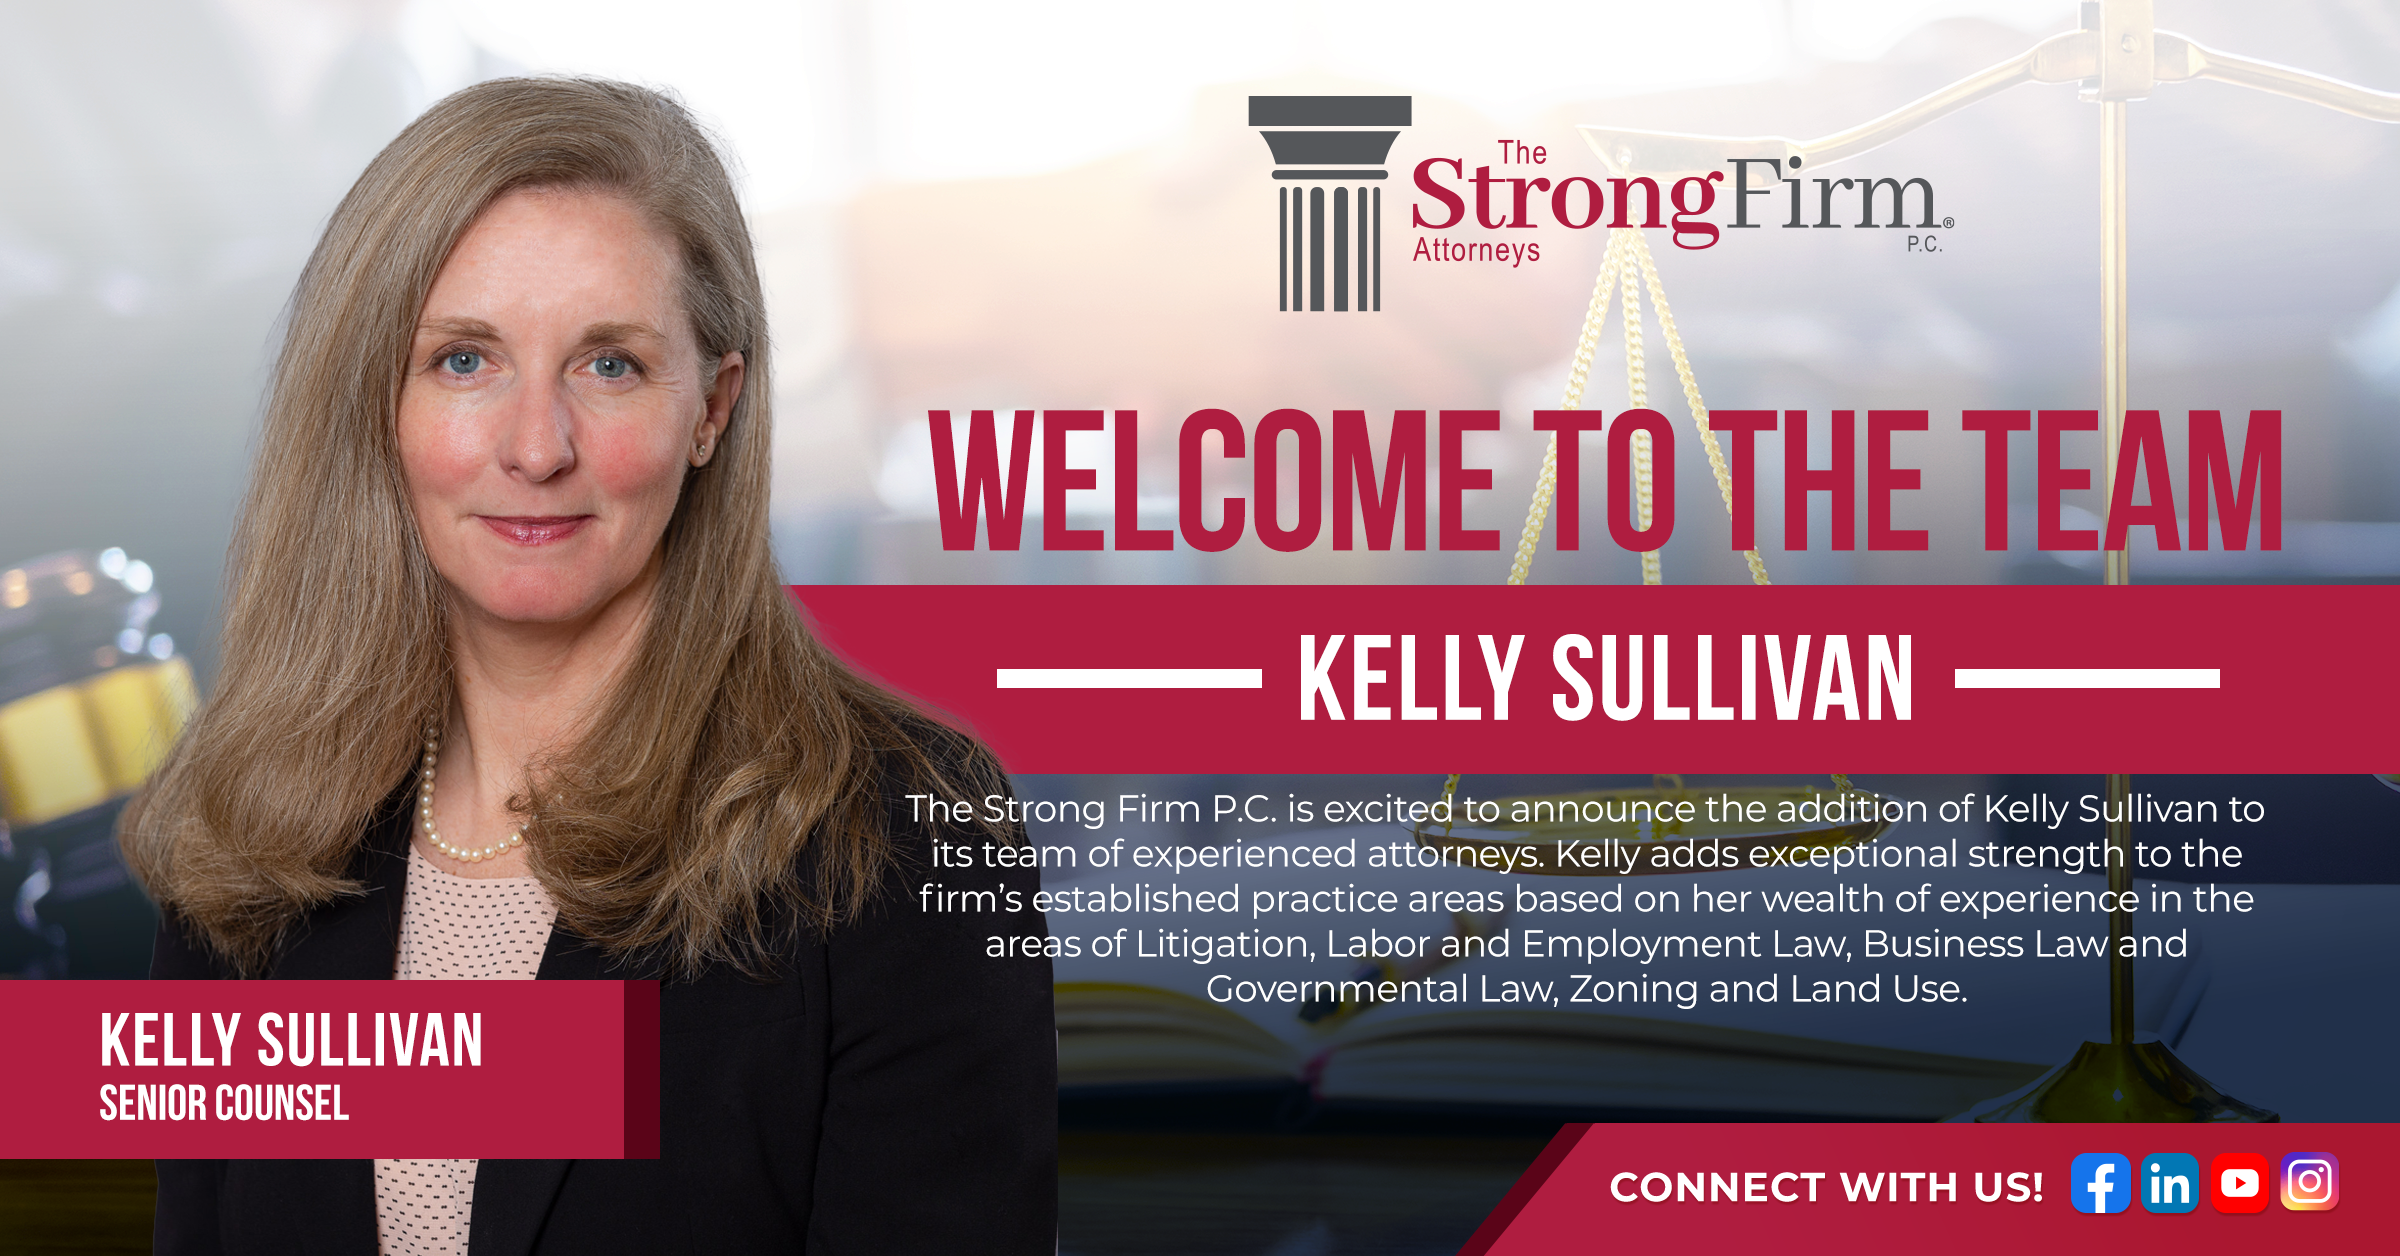 Kelly Sullivan Joins The Strong Firm P.C. As Senior Counsel